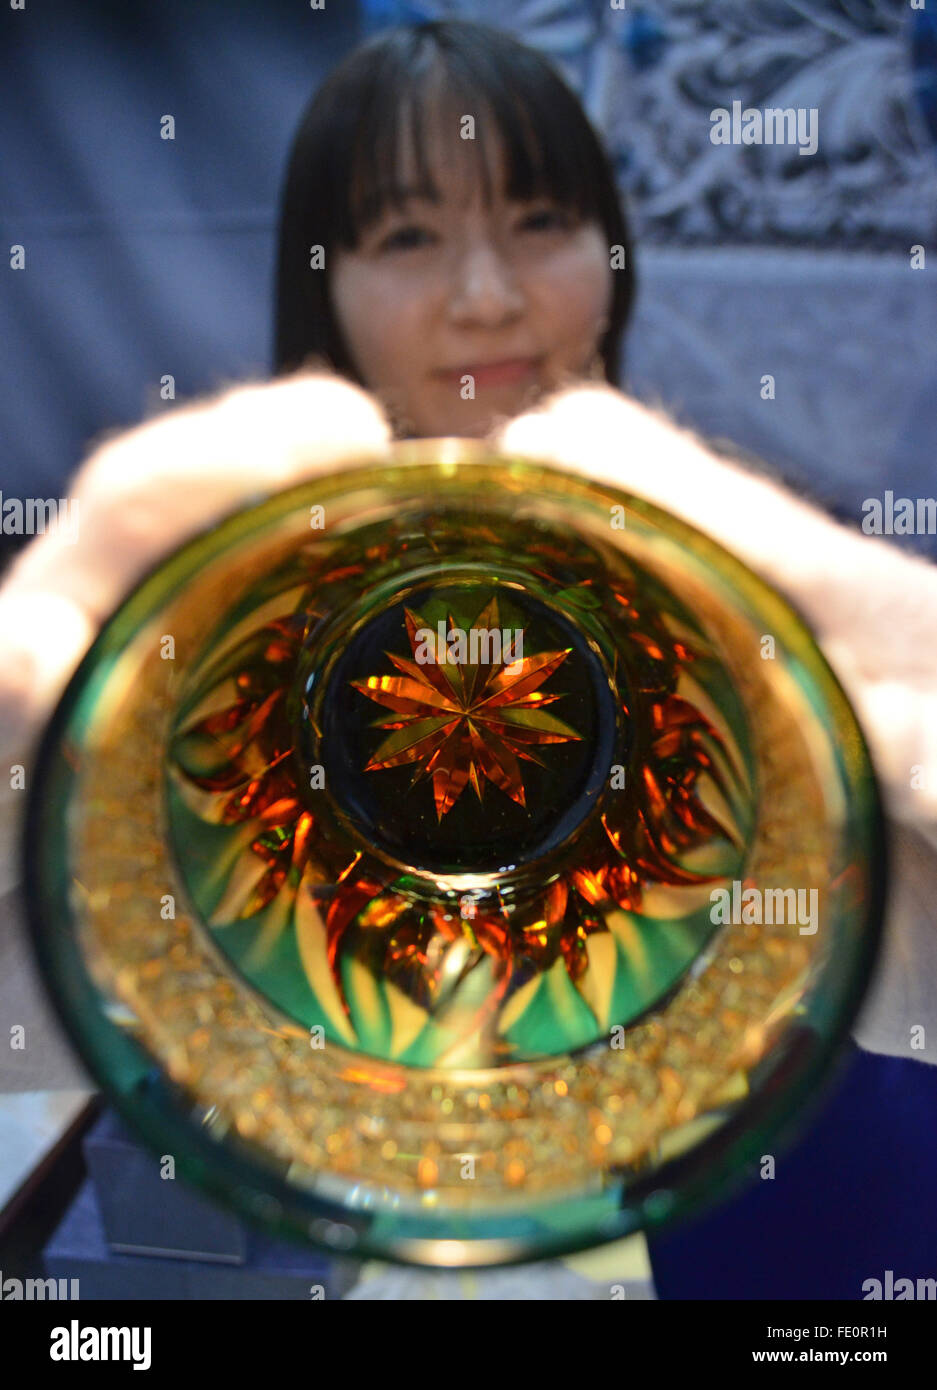 Tokyo, Japan. 3rd Feb, 2016. Yuri Kataoka of Kowasho Co. holds a 30000 yen crafted glass during the 81st Tokyo International Gift Show Spring 2016. The show offers a collection of the latest smart phone goods, stationary, hobby material goods, exhibits of personal gifts, consumer goods and decorative accessories. The show also includes a new product contest in which more than 400 new products enter to compite. Also a collection of unique products from all over the world to compete in the most popular imported product contest. Kitchen and dining room goods contest. Established in 1976, TIGS is Stock Photo